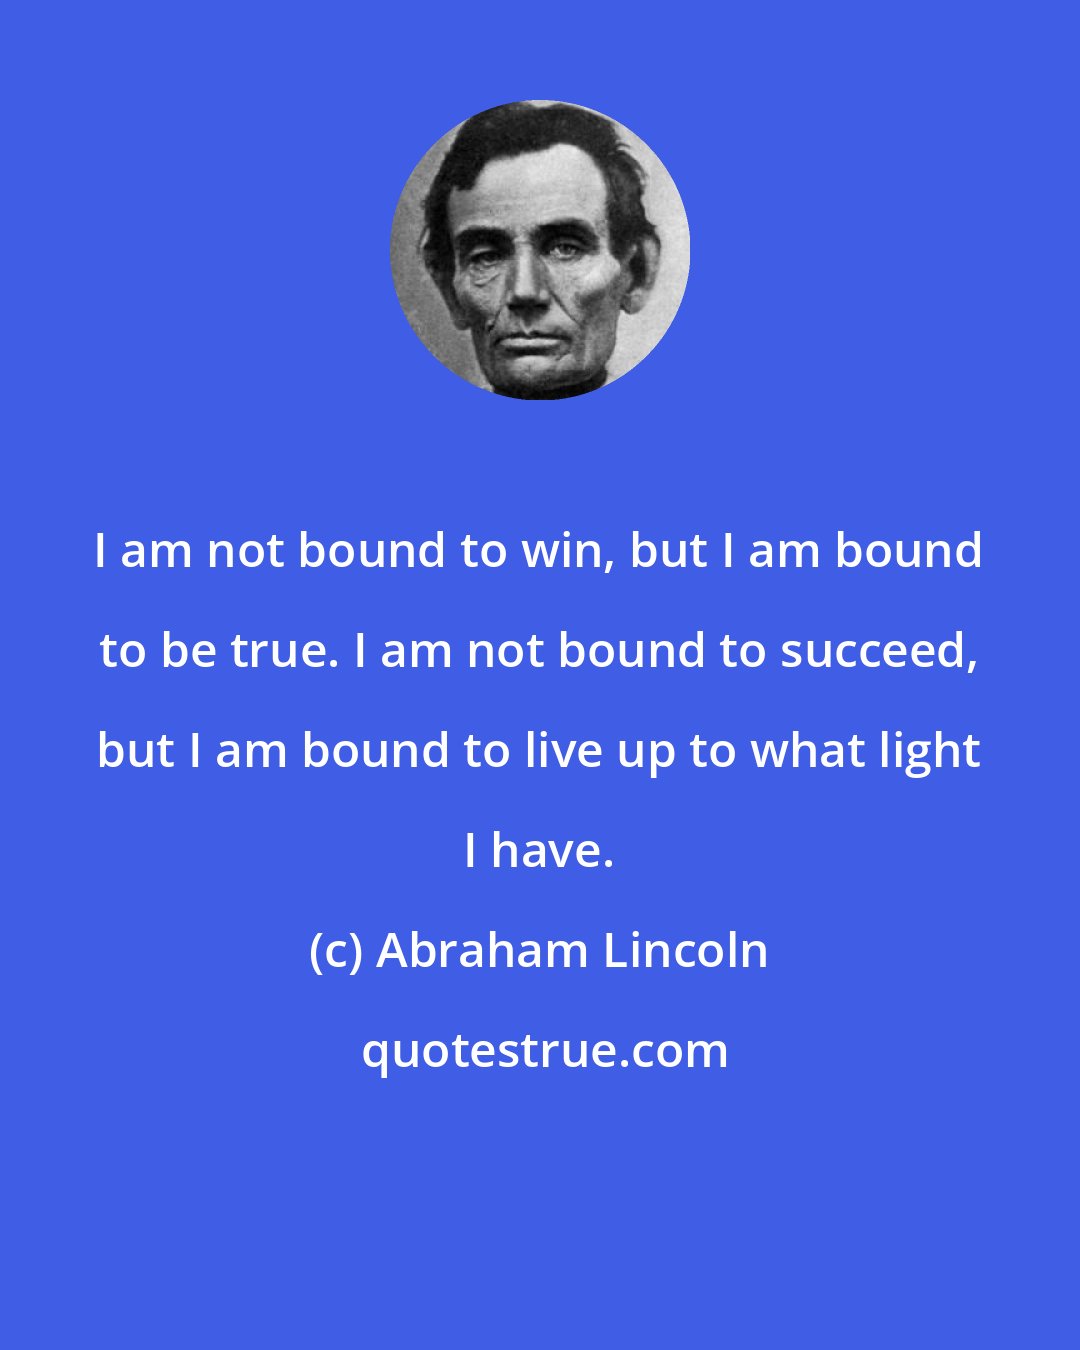 Abraham Lincoln: I am not bound to win, but I am bound to be true. I am not bound to succeed, but I am bound to live up to what light I have.